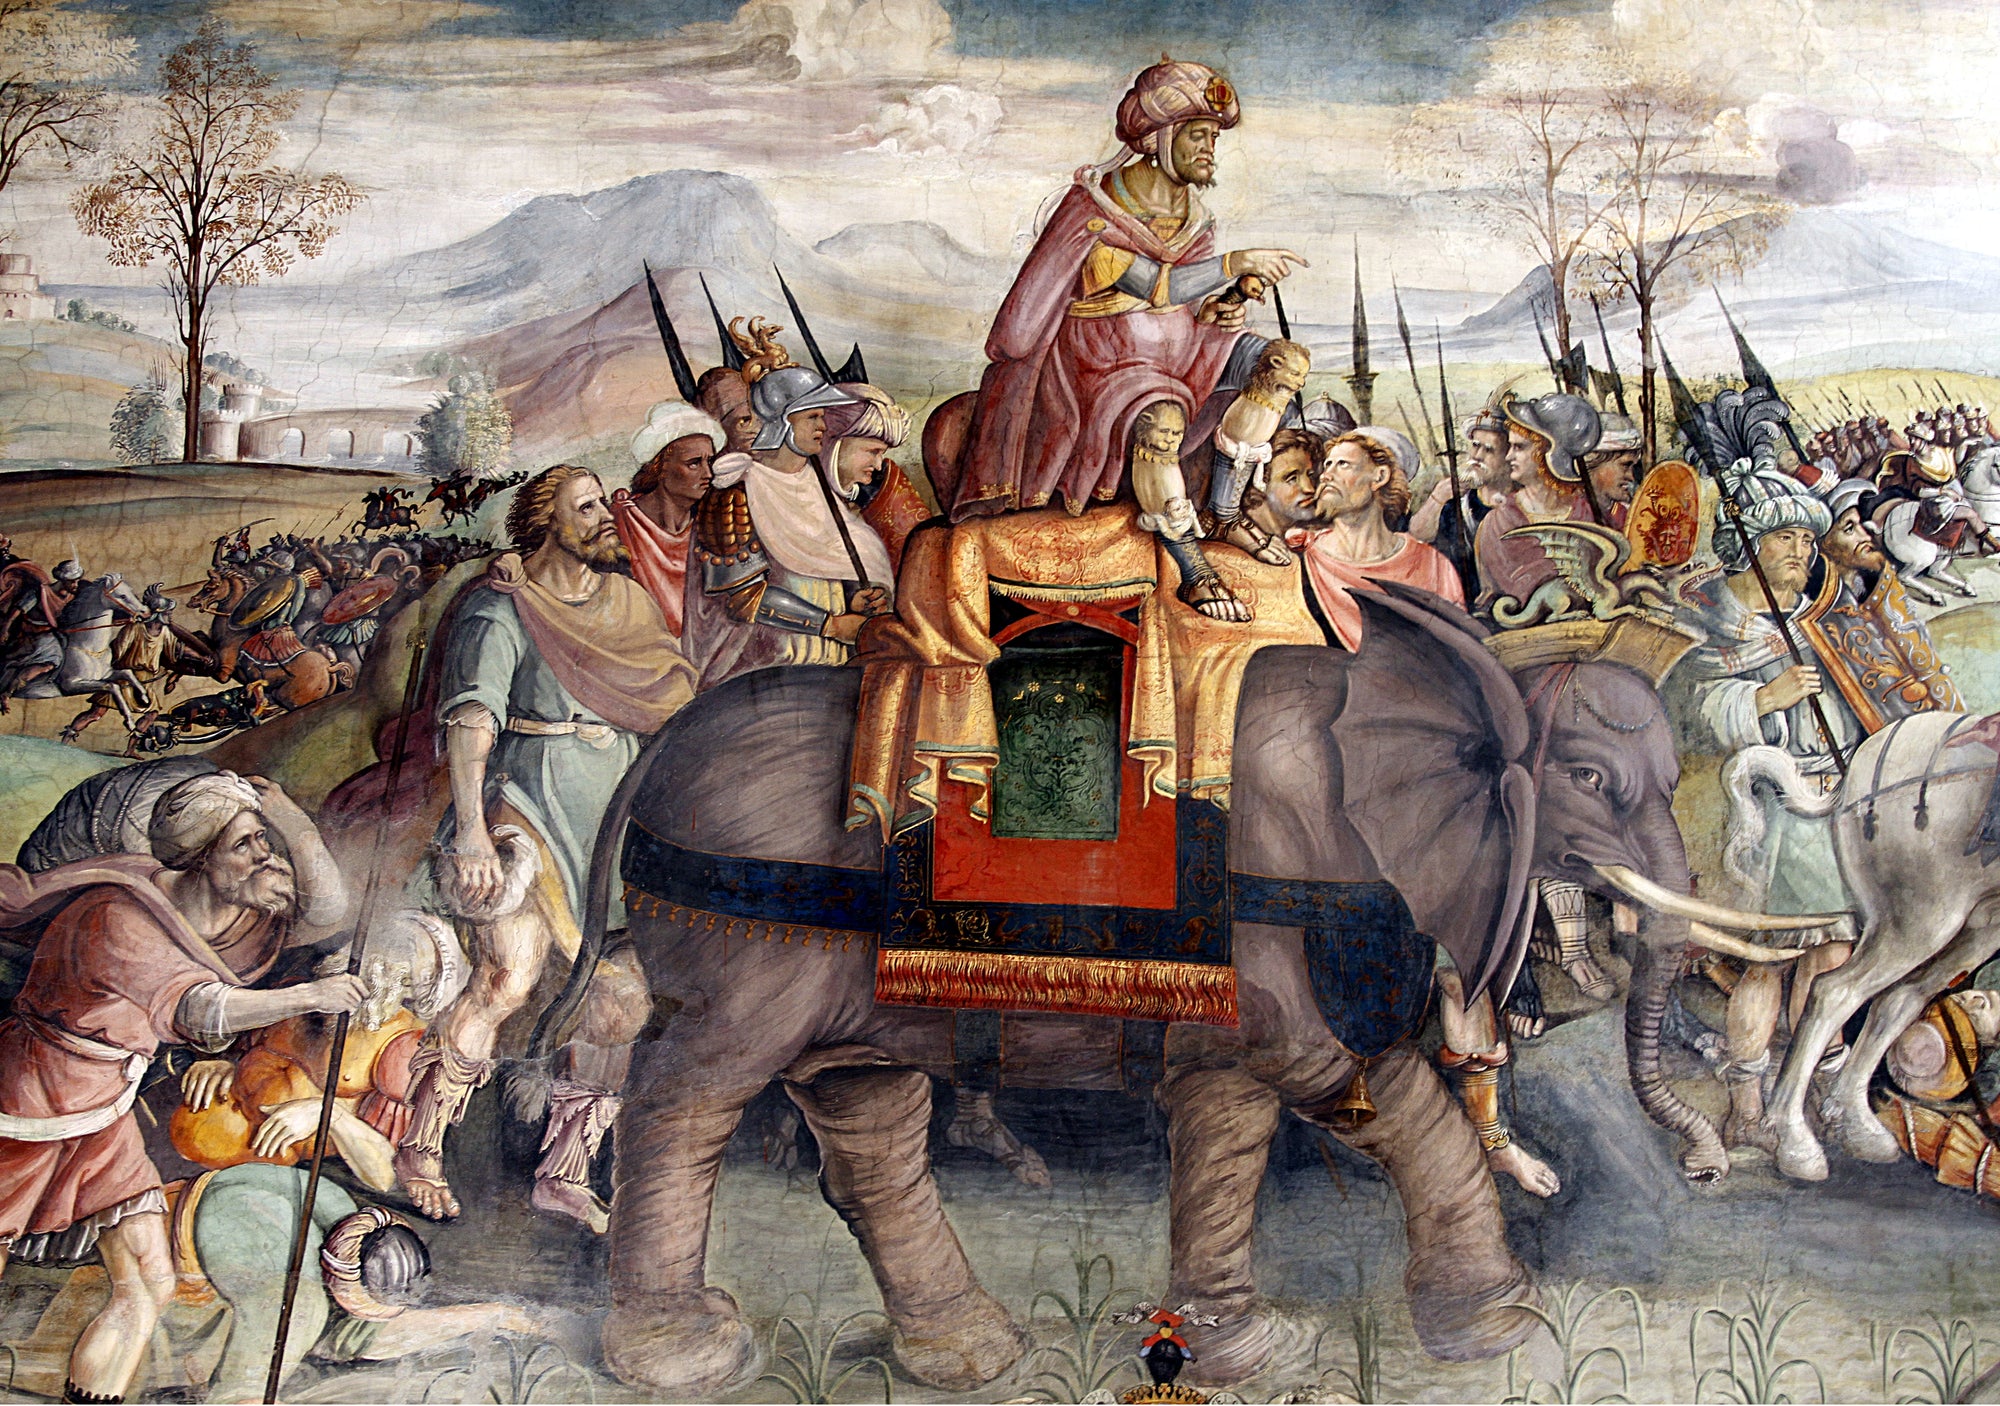 A 16th century fresco depicting the Carthaginian general Hannibal, a key figure of the Punic Wars.